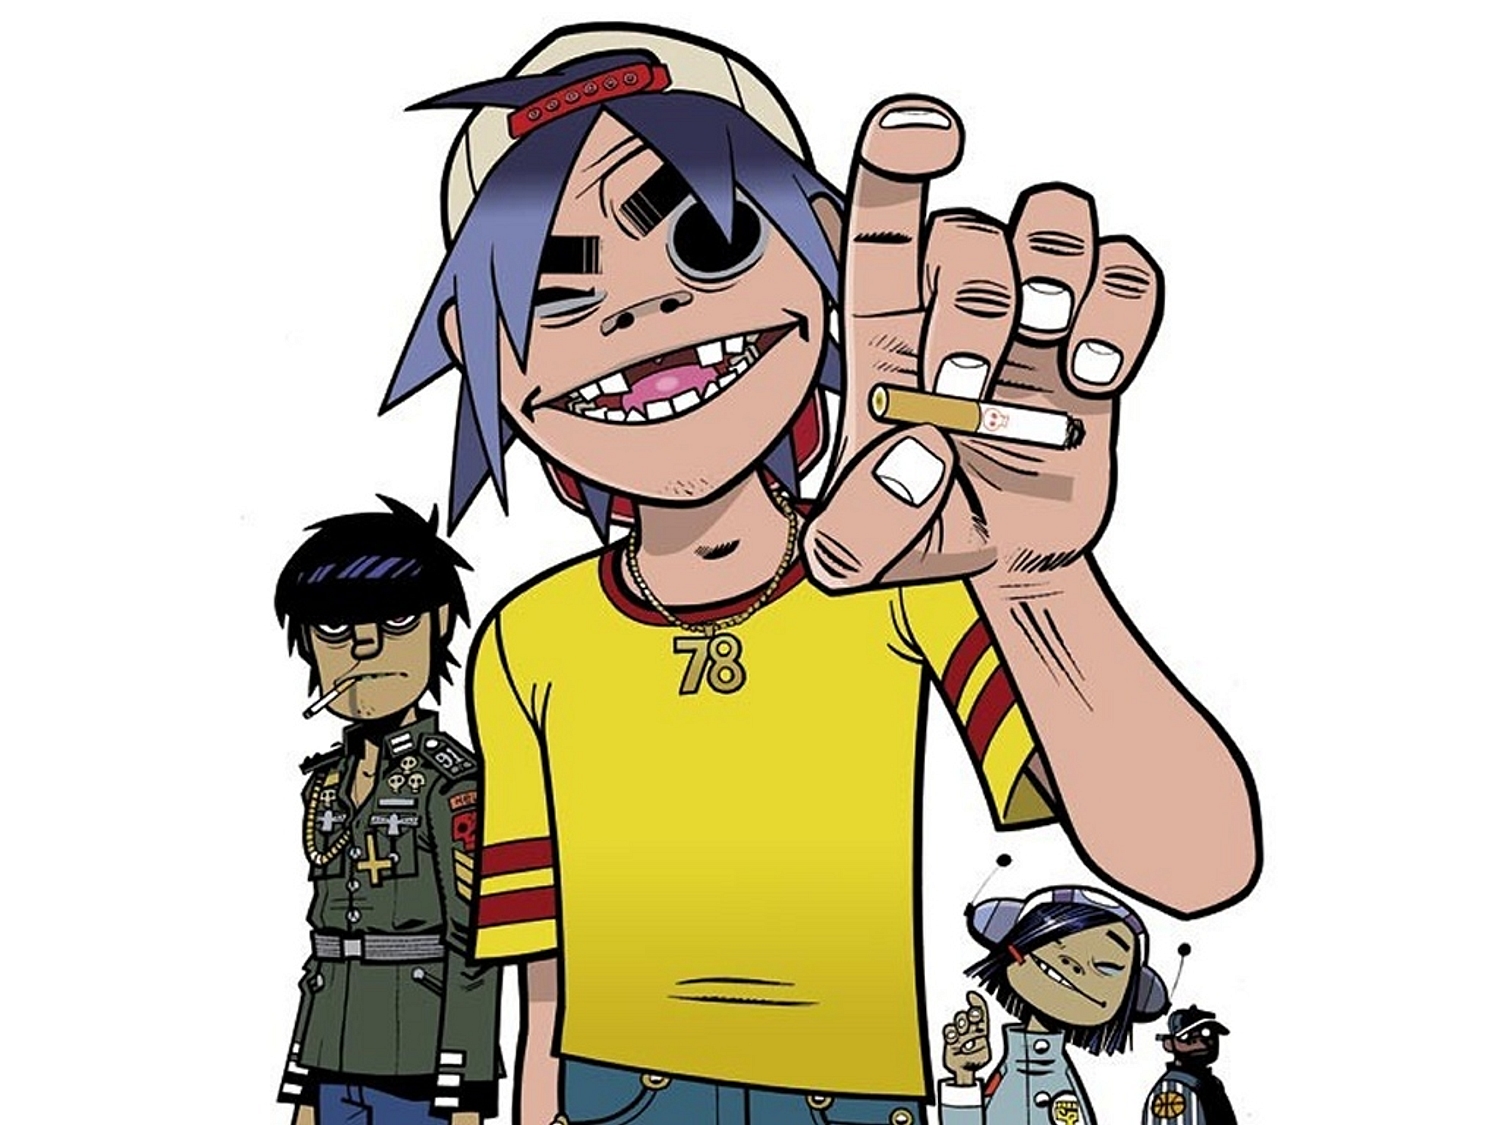 Jamie Hewlett of Gorillaz on his new exhibition: "I wanted it to feel right"